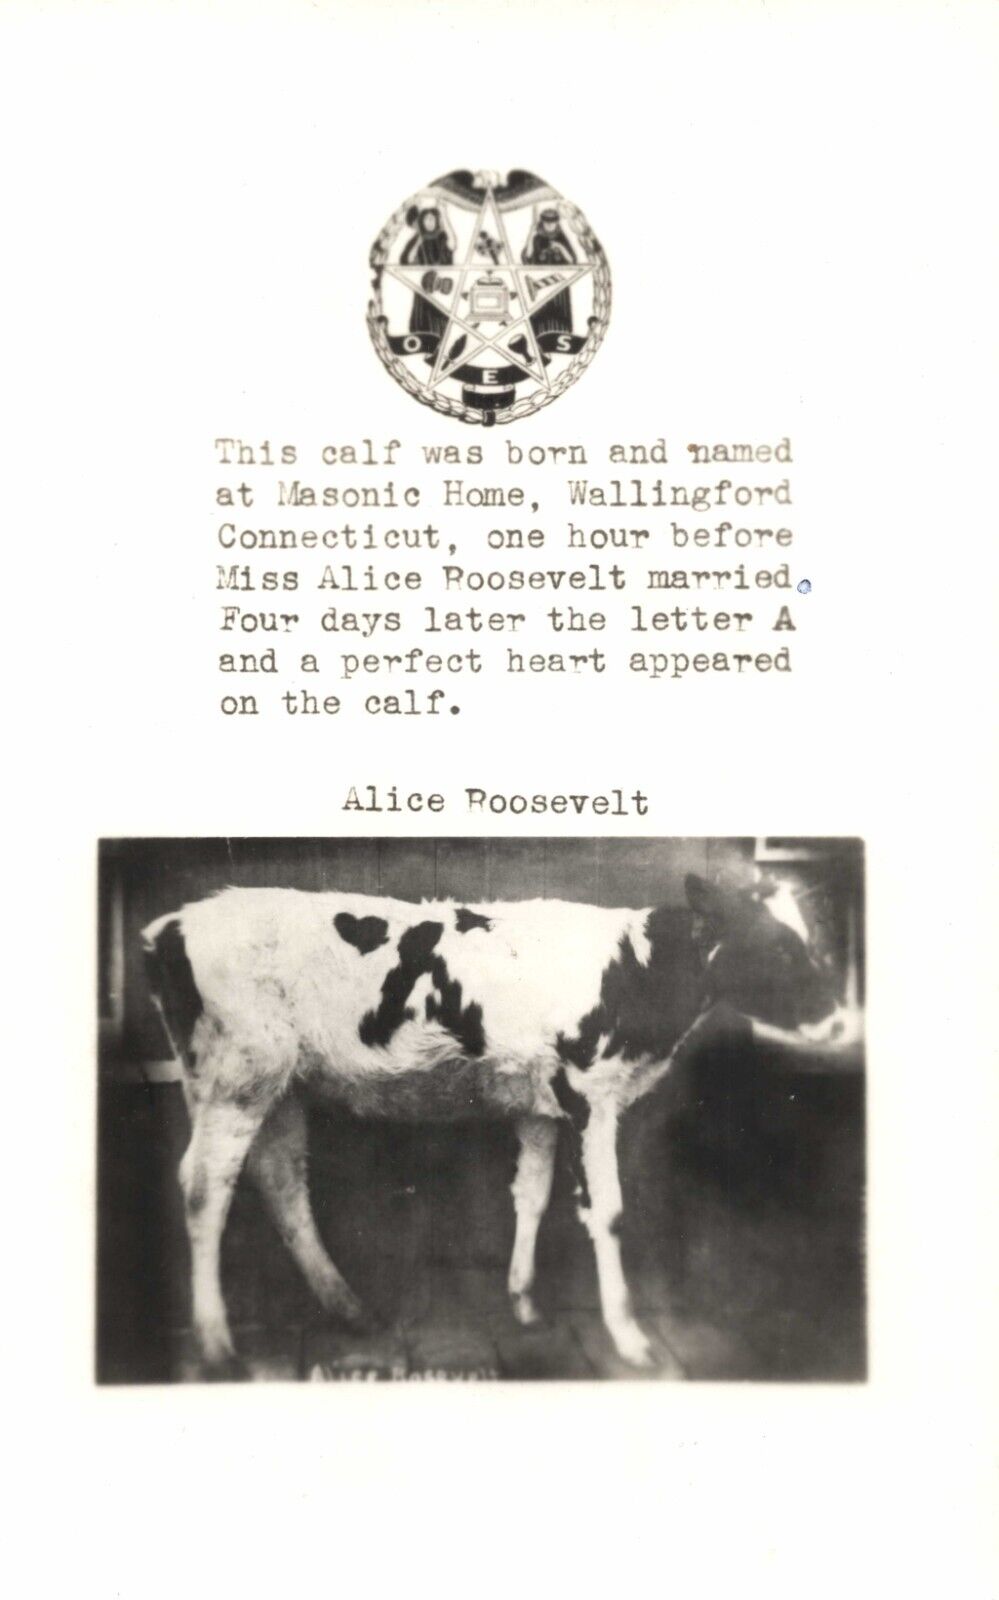 Calf Cow Named Alice Roosevelt at the Masonic Home Wallingford CT  RPPC Postcard